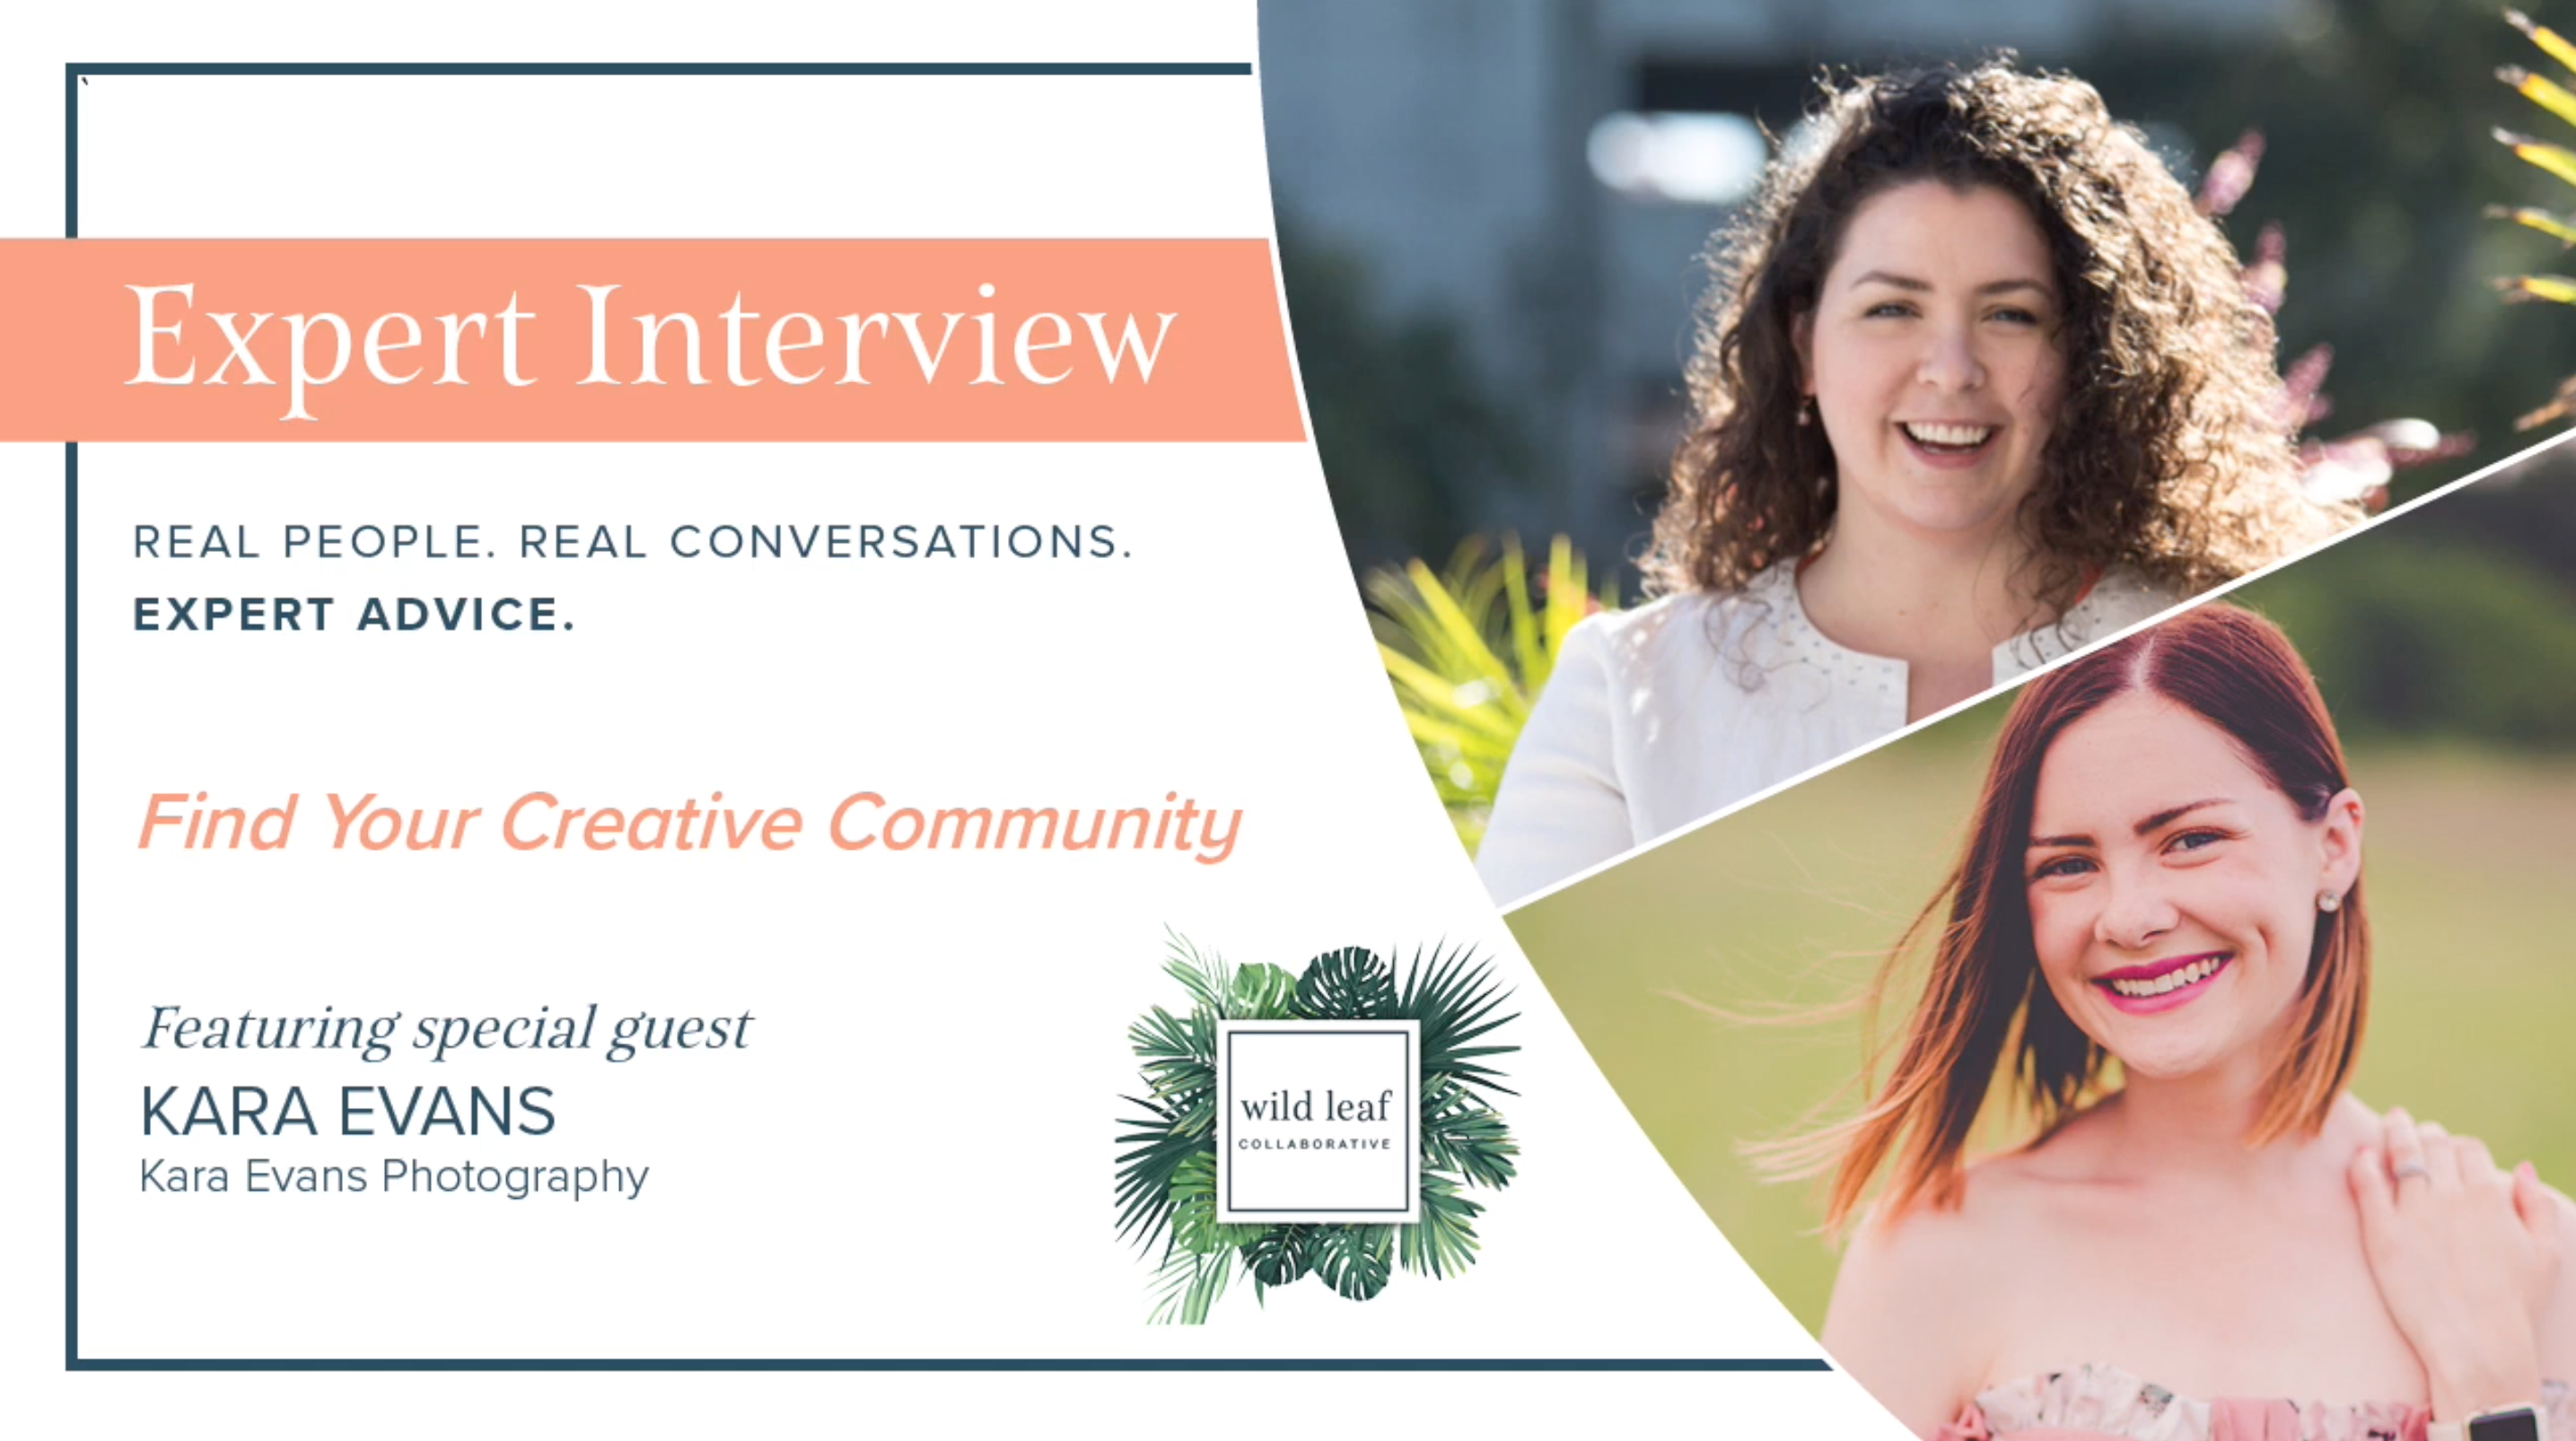 Finding your creative community feature with Poppie Studios - Chicagoland wedding photographer and mentor for creatives Kara Evans Photographer.